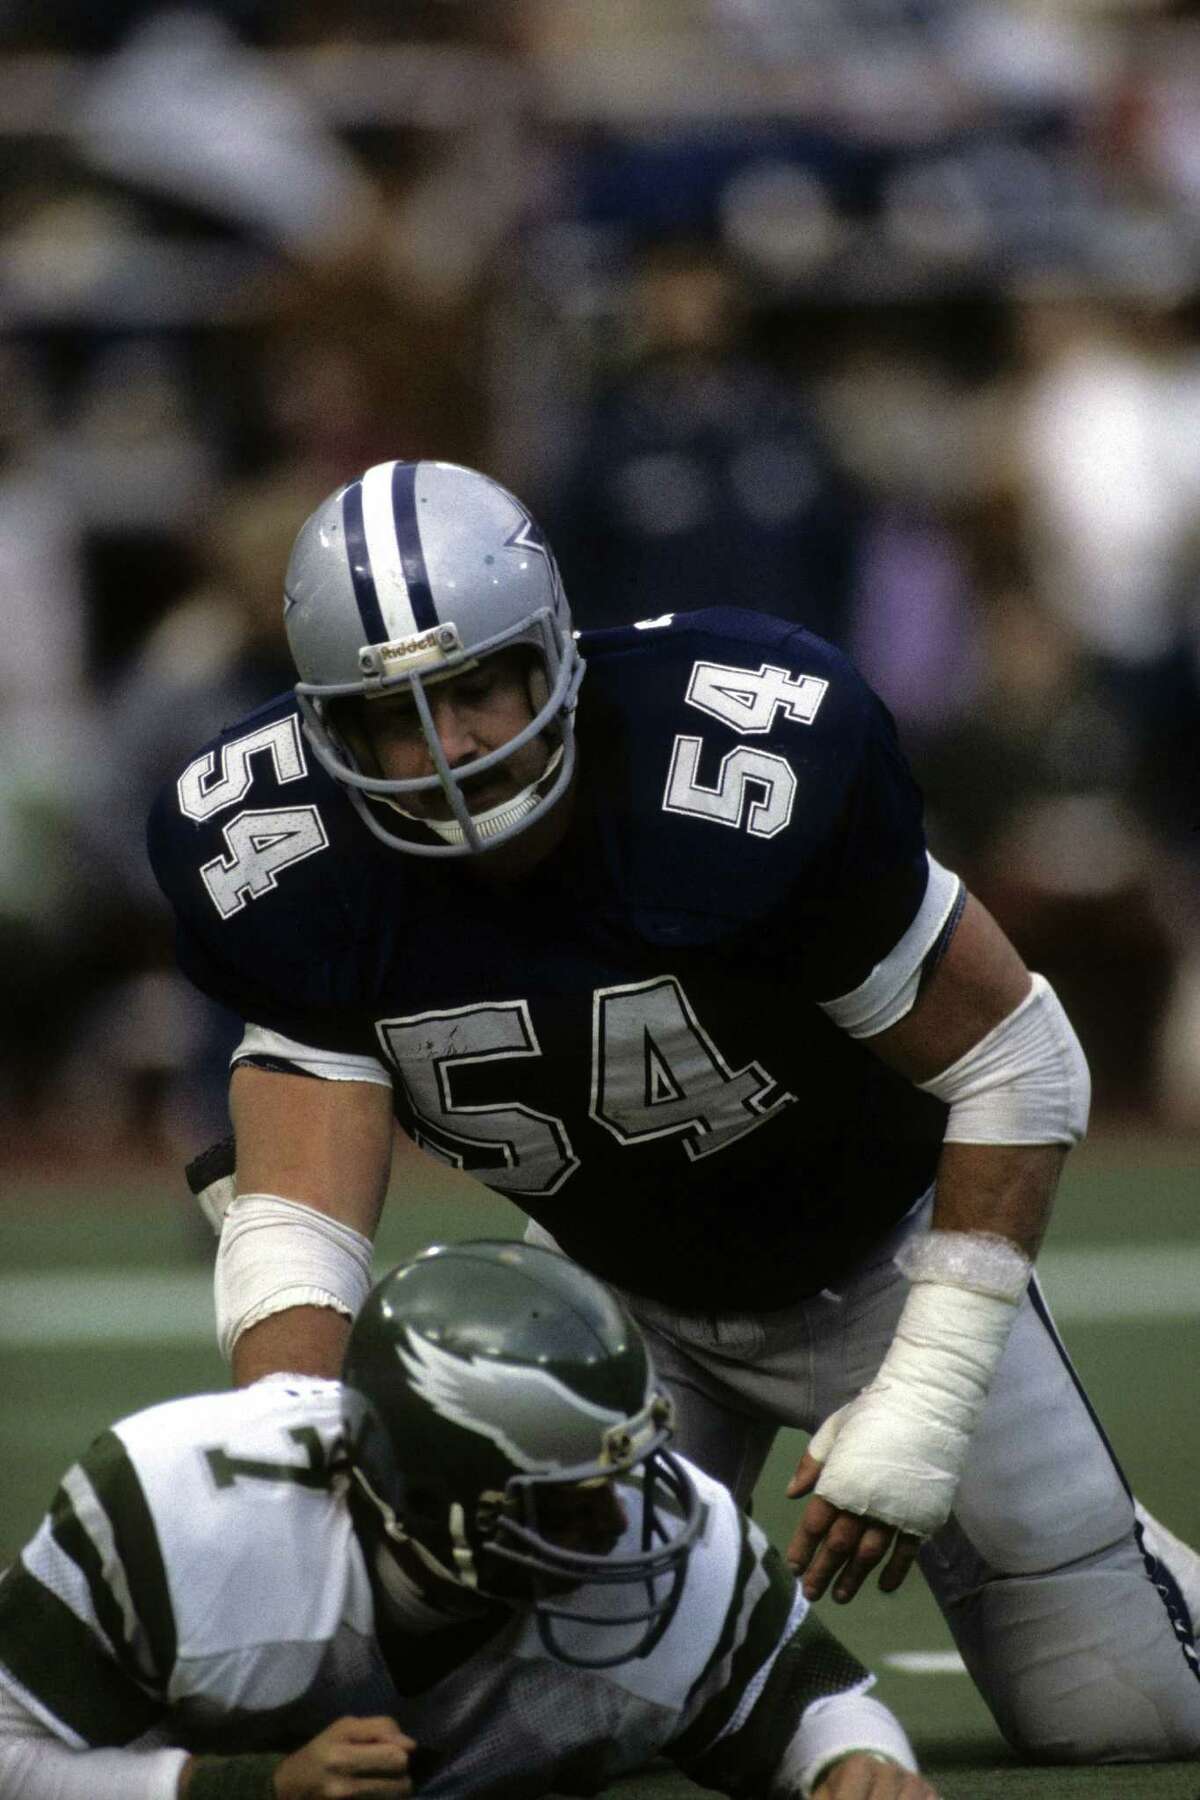 Cowboys Hall of Famer Randy White (54) was one of 4,500 ex-players involved in a concussion lawsuit against the NFL.